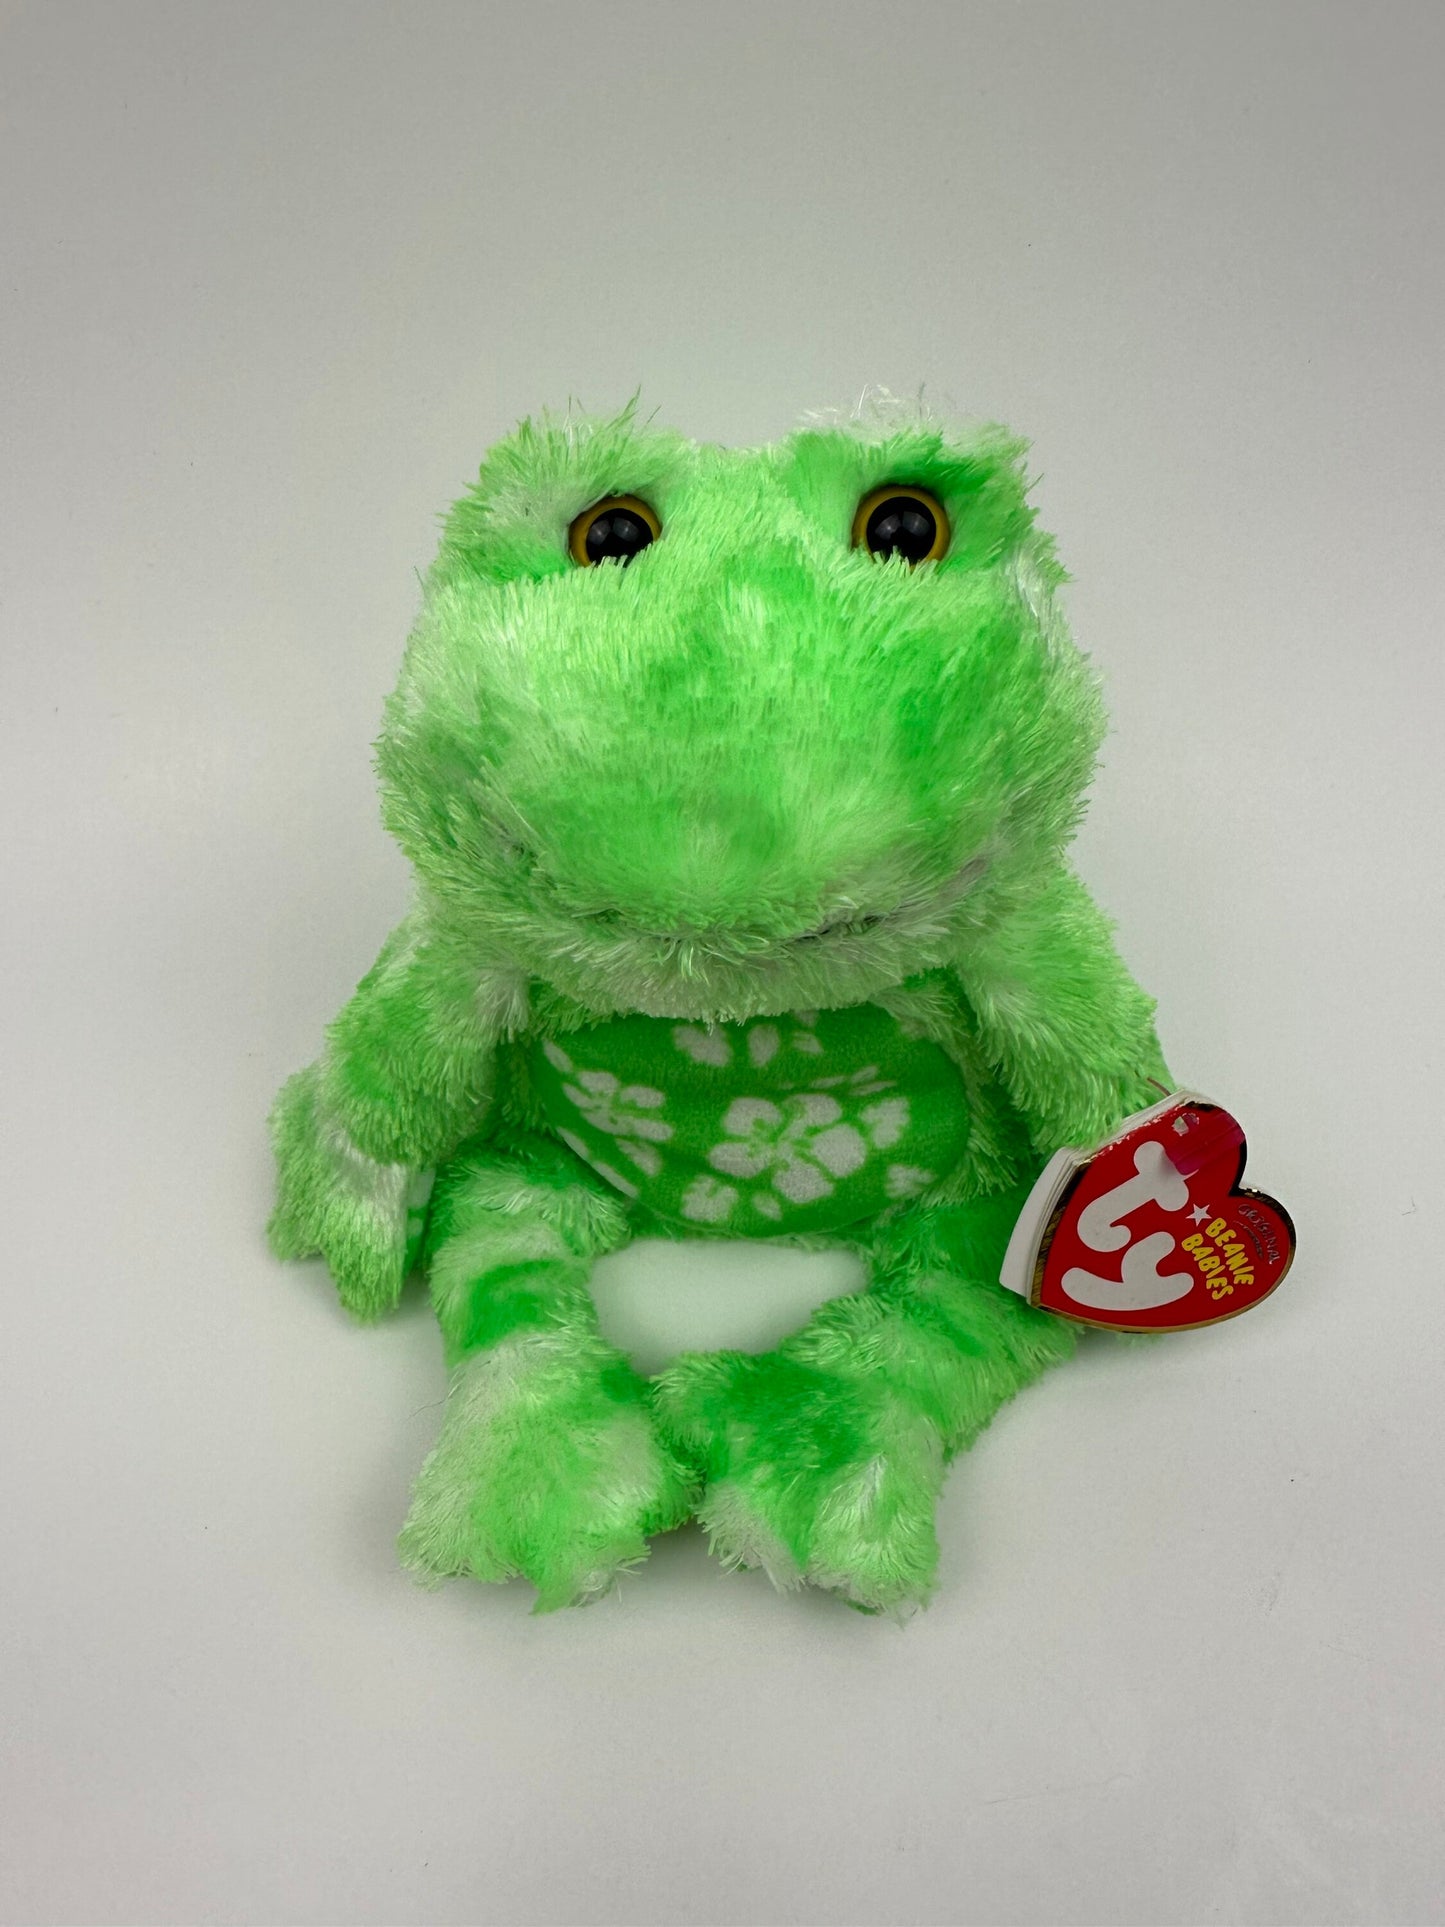 Ty Beanie Baby “Palms” the Frog! (7 inch)